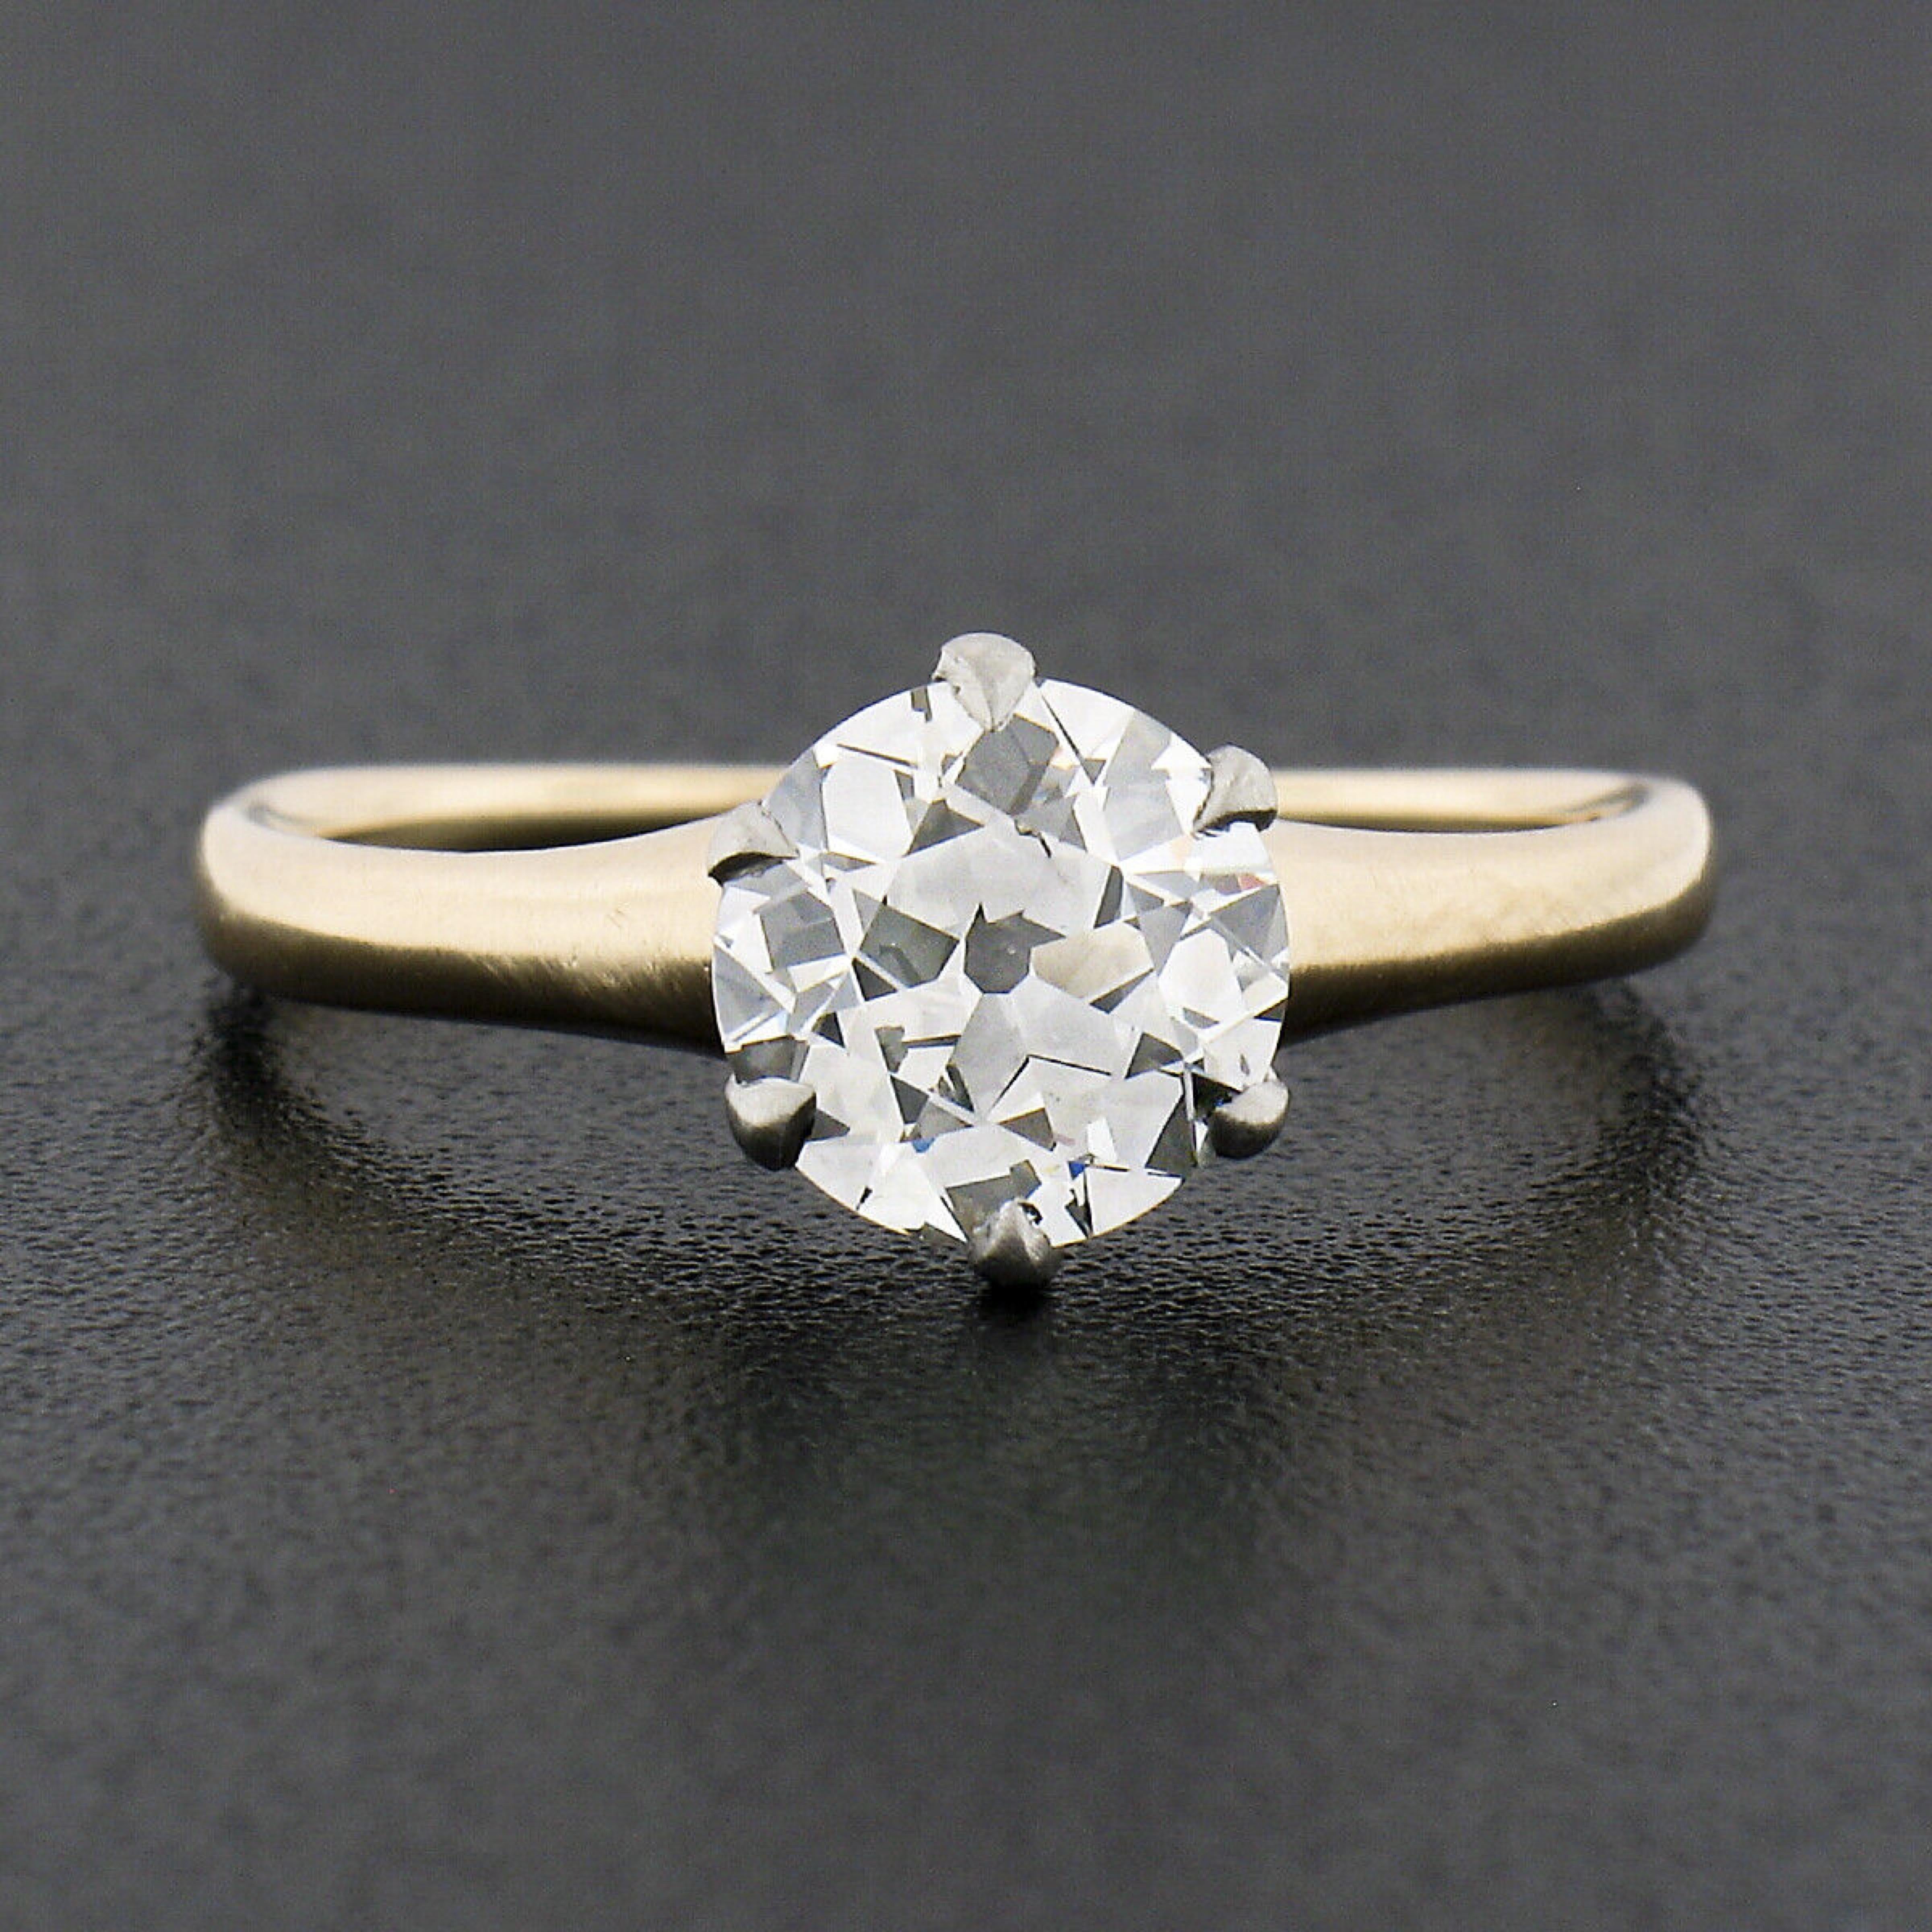 This stunning antique solitaire engagement ring was crafted in solid 14k yellow gold and platinum during the Edwardian period and features an outstanding old European cut diamond perfectly 6-prong set at its center. The GIA certified diamond weighs